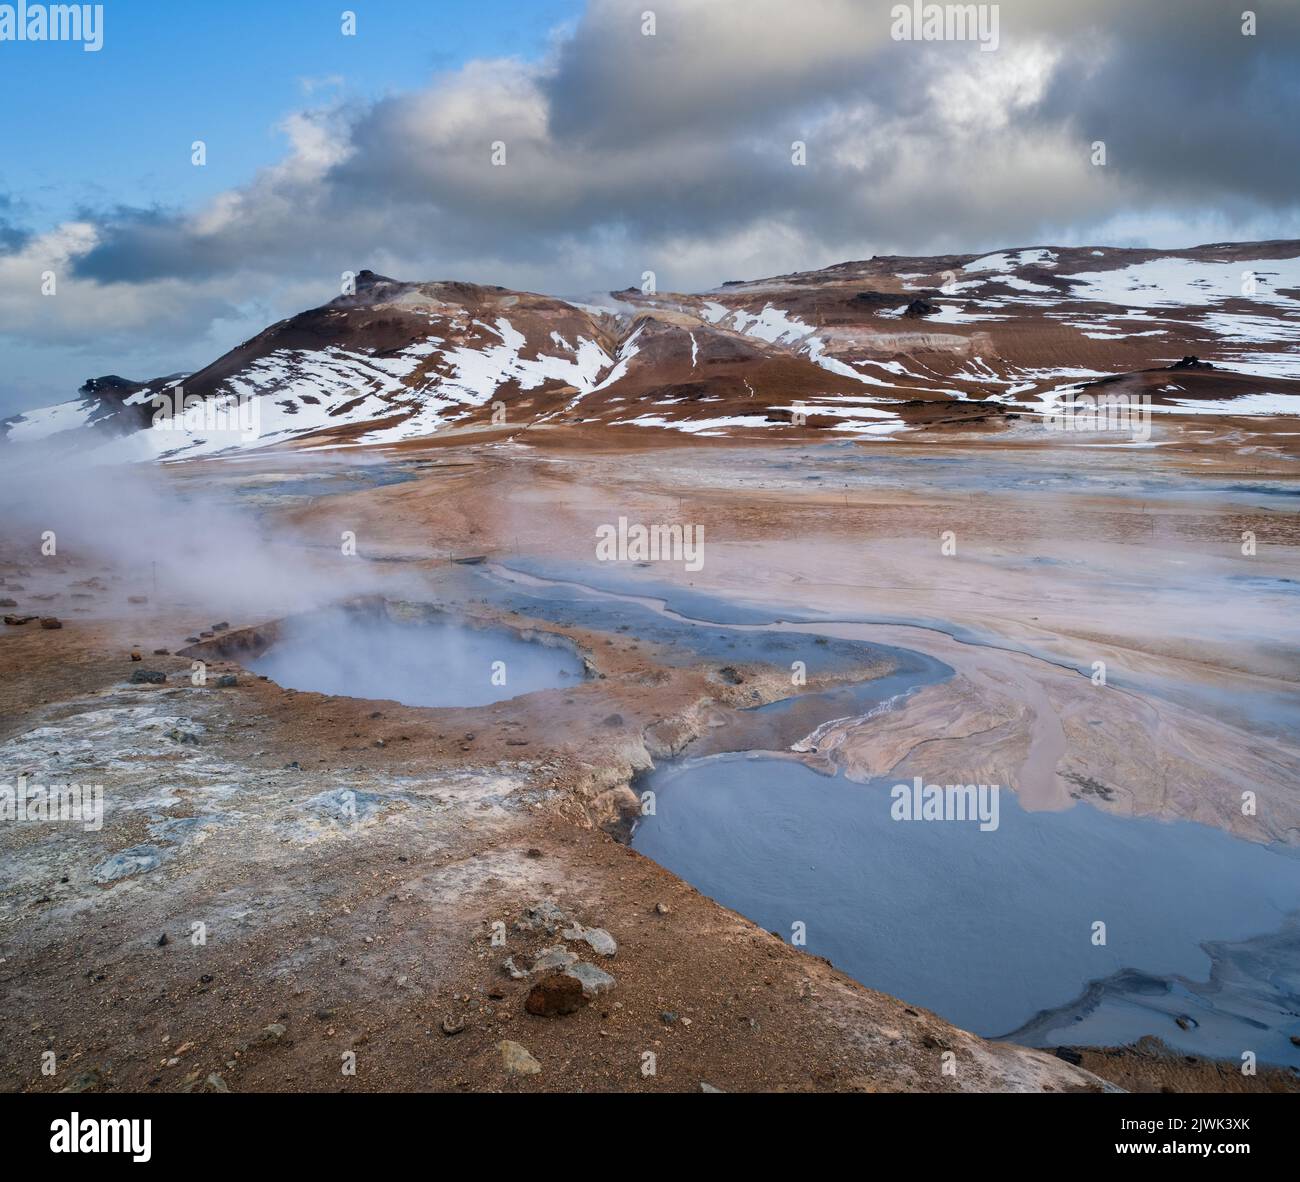 The Namafjall Geothermal Area, Iceland, on the east side of Lake Myvatn. At this area, also known as Hverir, are many smoking fumaroles, boiling mud p Stock Photo